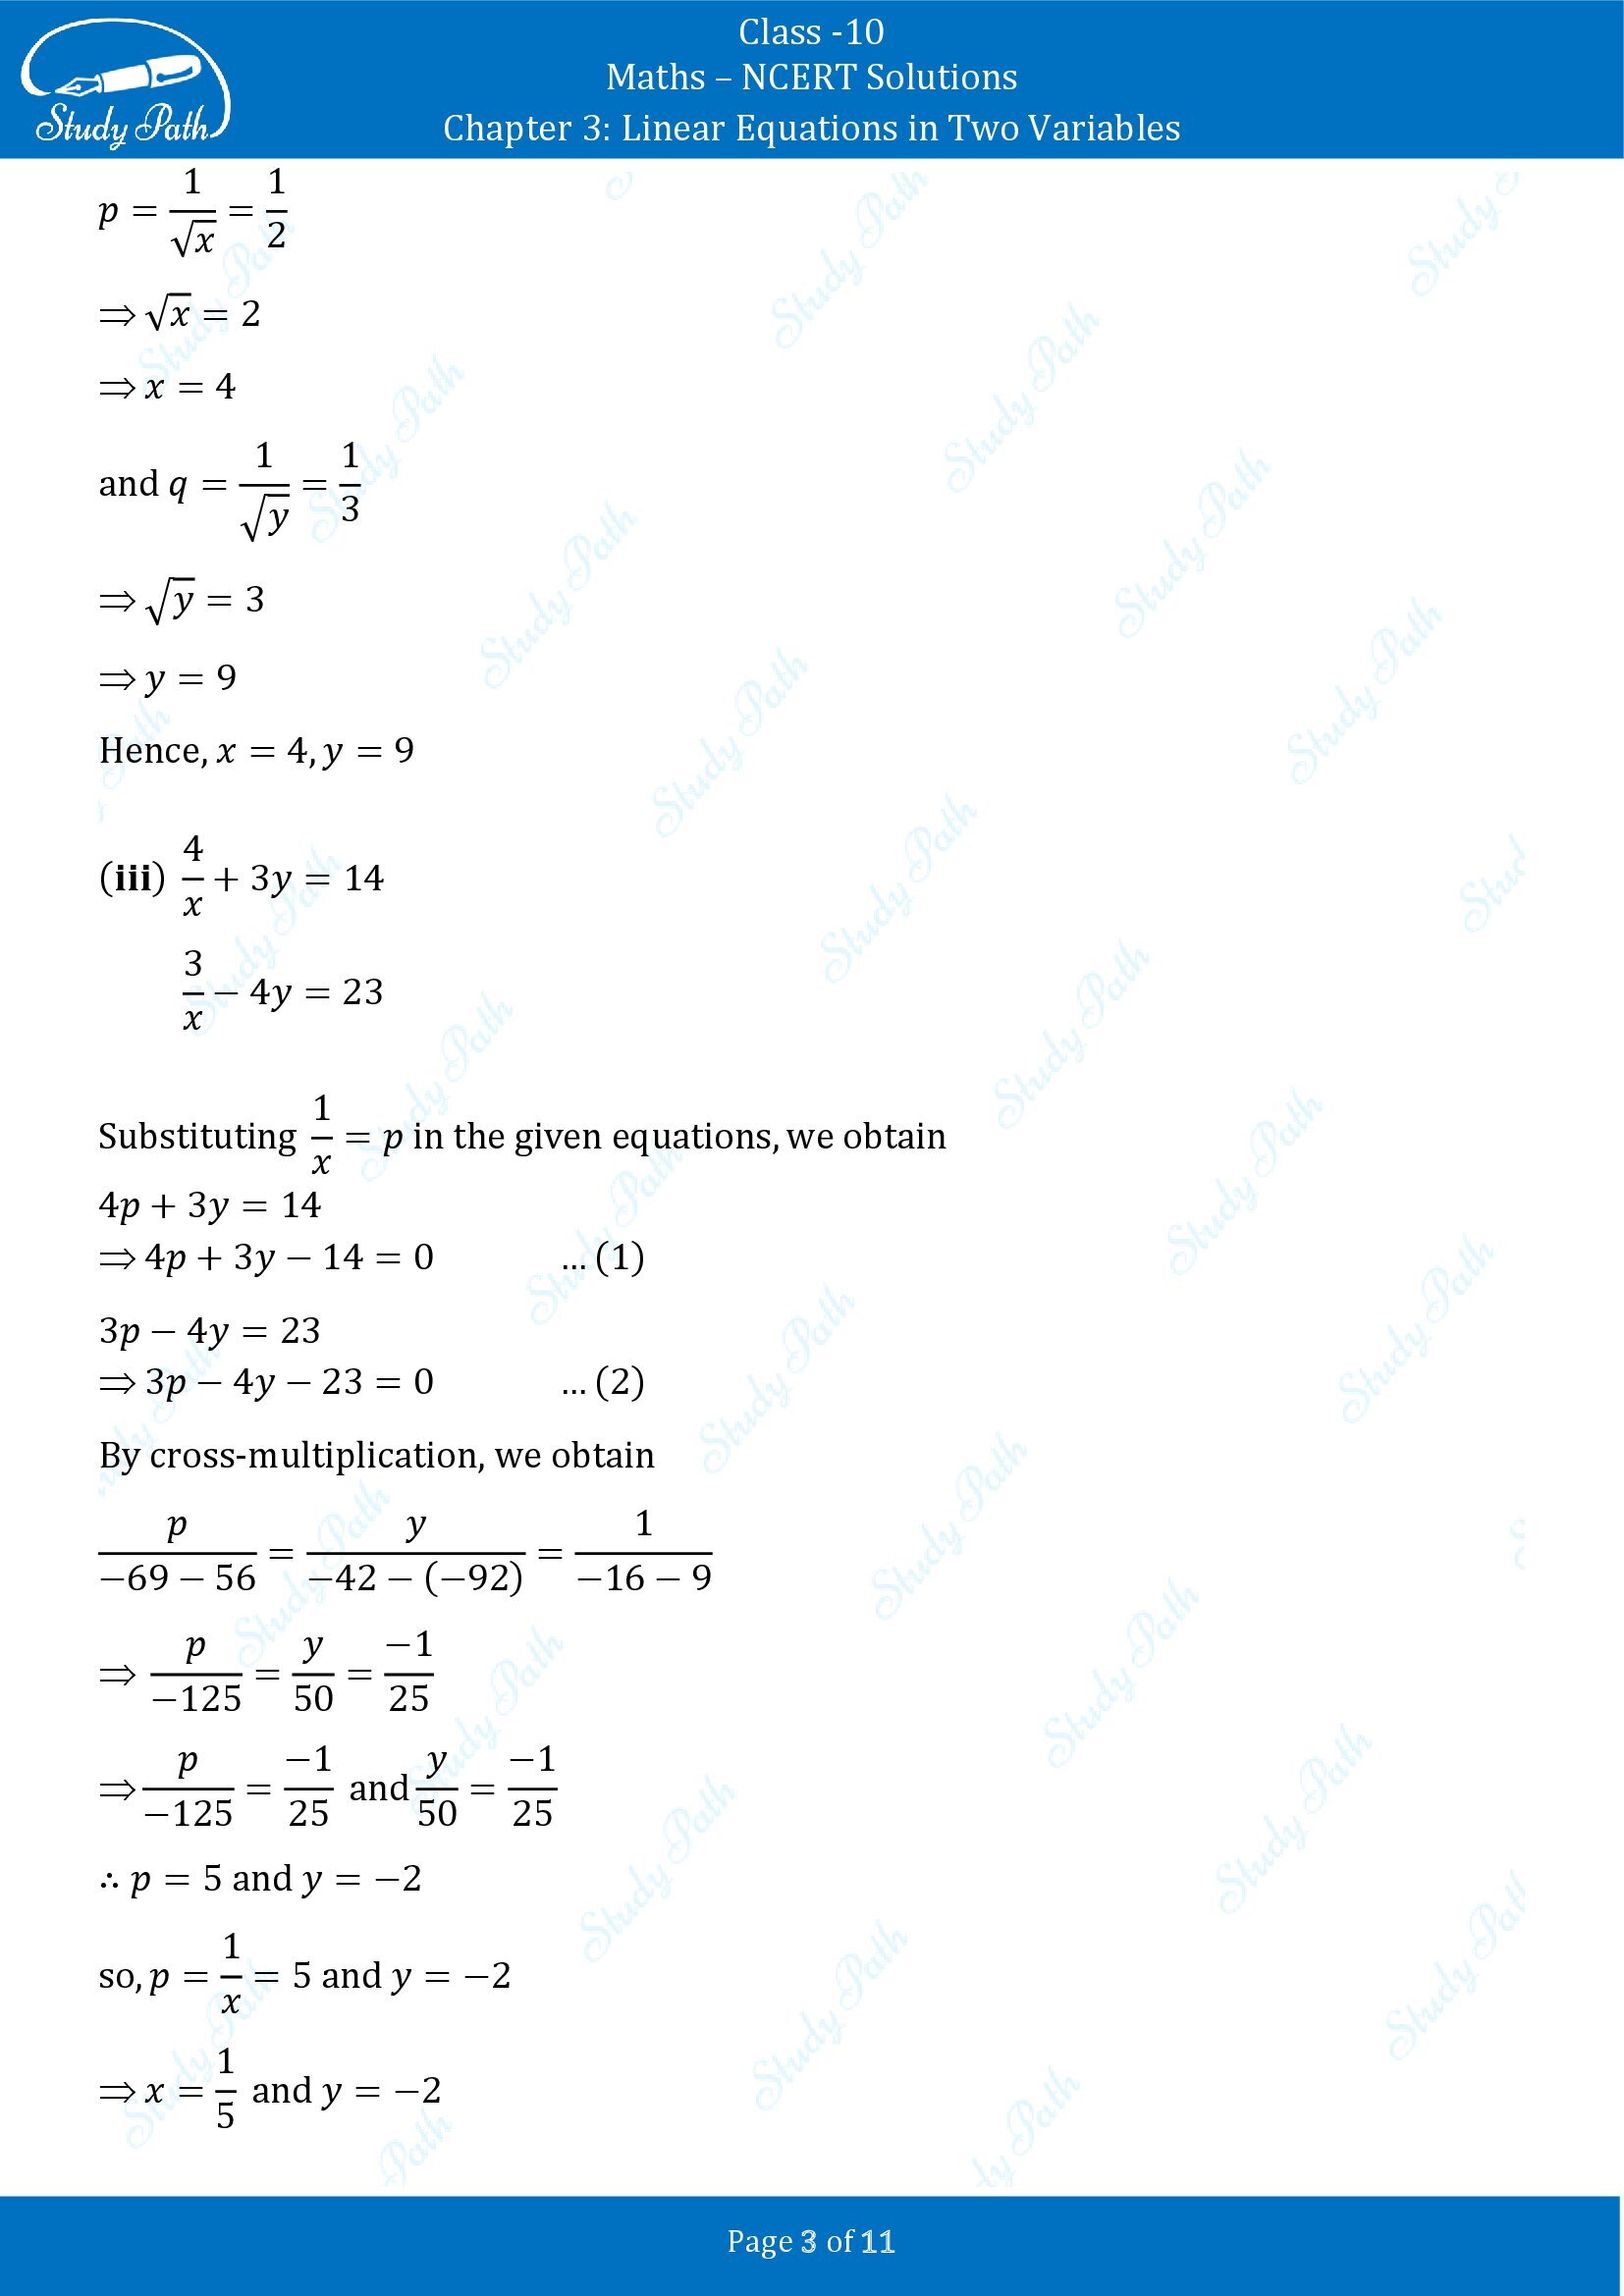 NCERT Solutions for Class 10 Maths Chapter 3 Linear Equations in Two Variables Exercise 3.6 00003